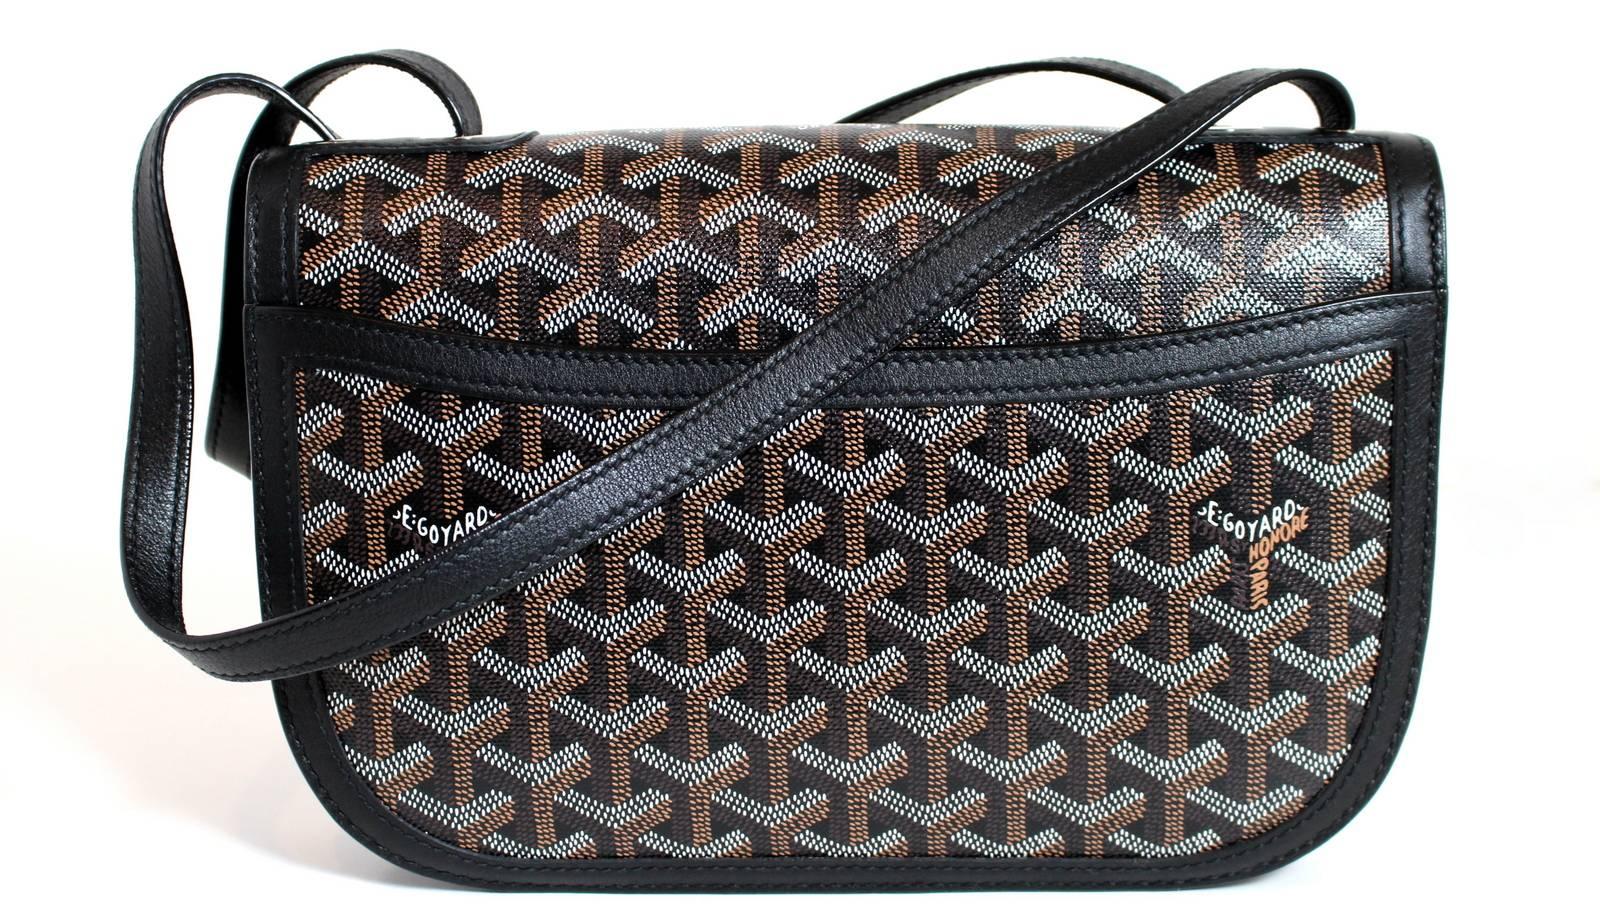 Black Monogram 233 Goyard Shoulder Bag with Wallet- New
Retail $5,180.00 plus taxes.  
Unusually rare style has only recently become available in the U.S.    

The 233 Goyard is constructed of a durable coated fabric and black leather.  